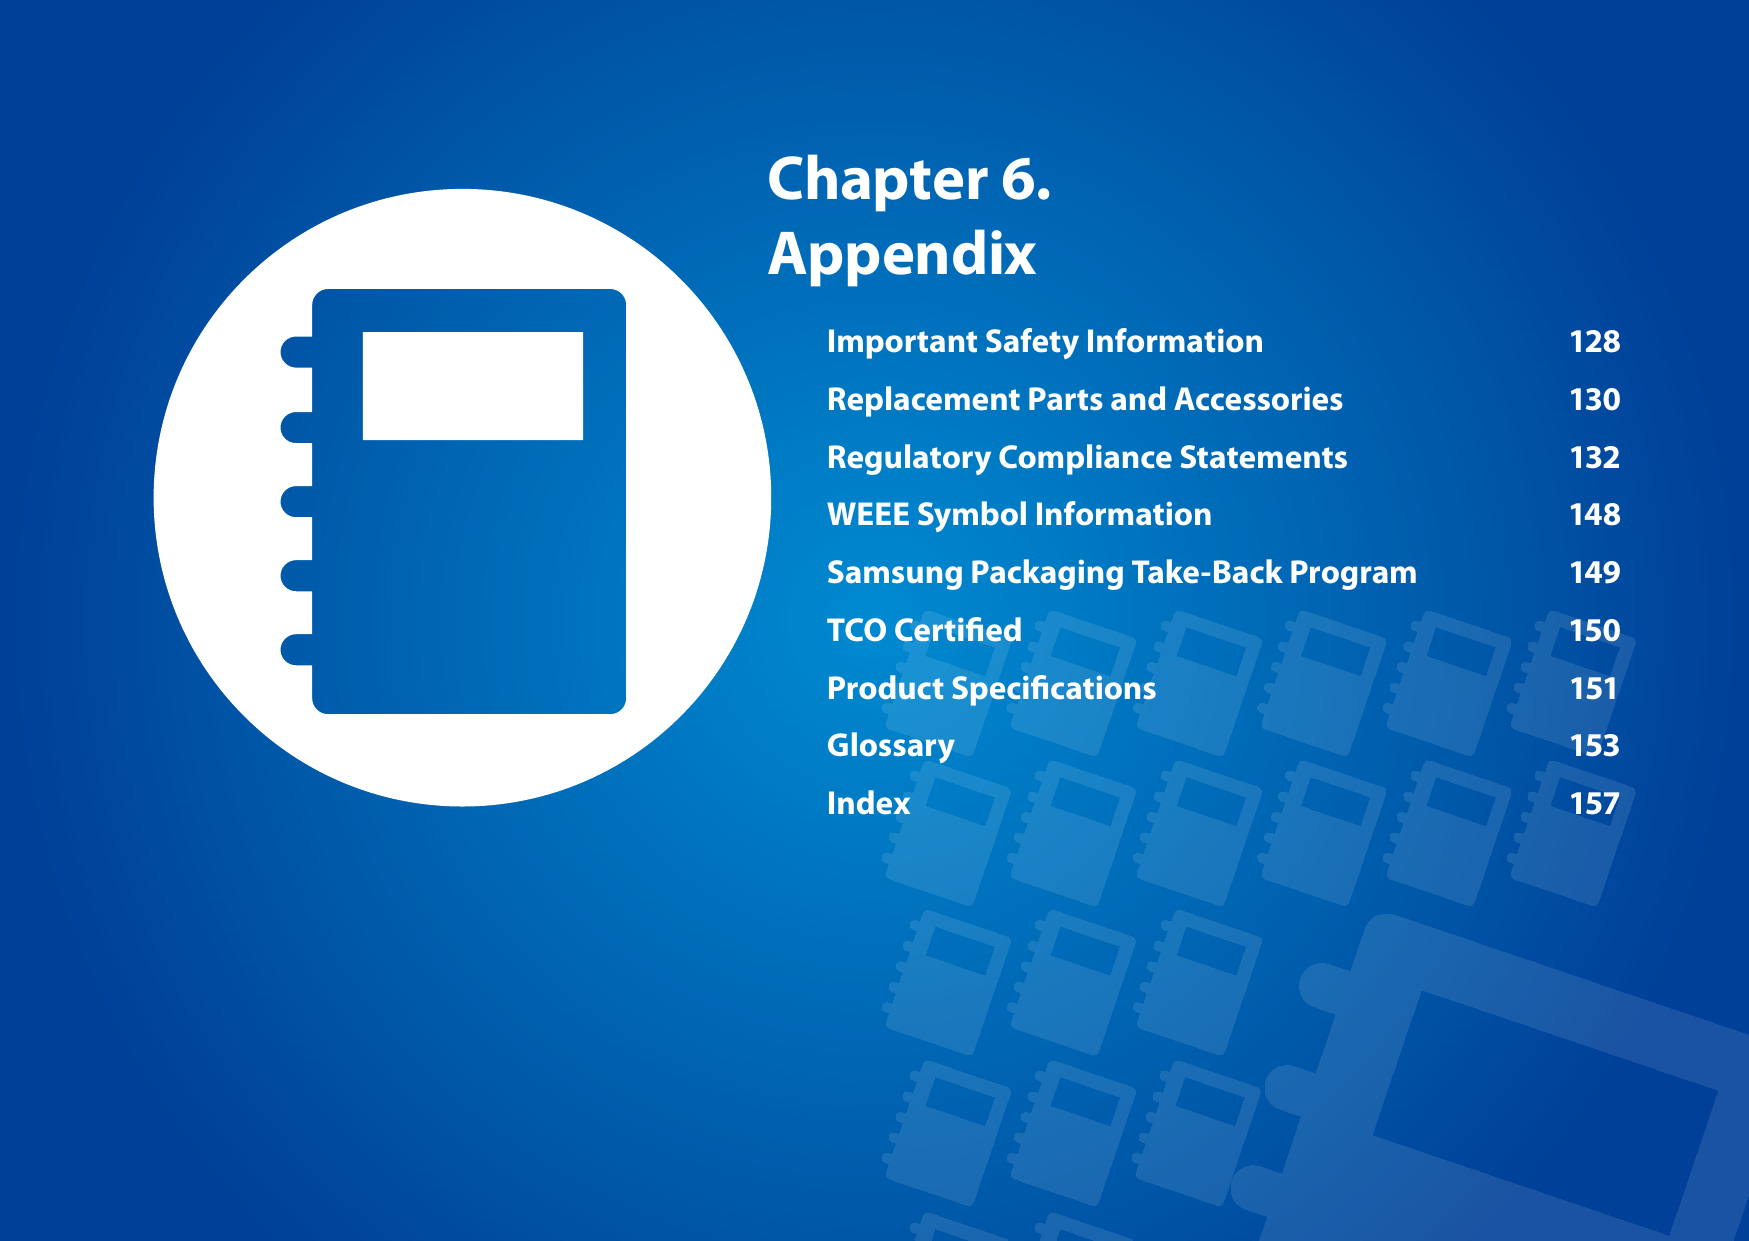 Chapter 6. AppendixImportant Safety Information  128Replacement Parts and Accessories  130Regulatory Compliance Statements  132WEEE Symbol Information  148Samsung Packaging Take-Back Program  149TCO Certied  150Product Specications  151Glossary 153Index 157